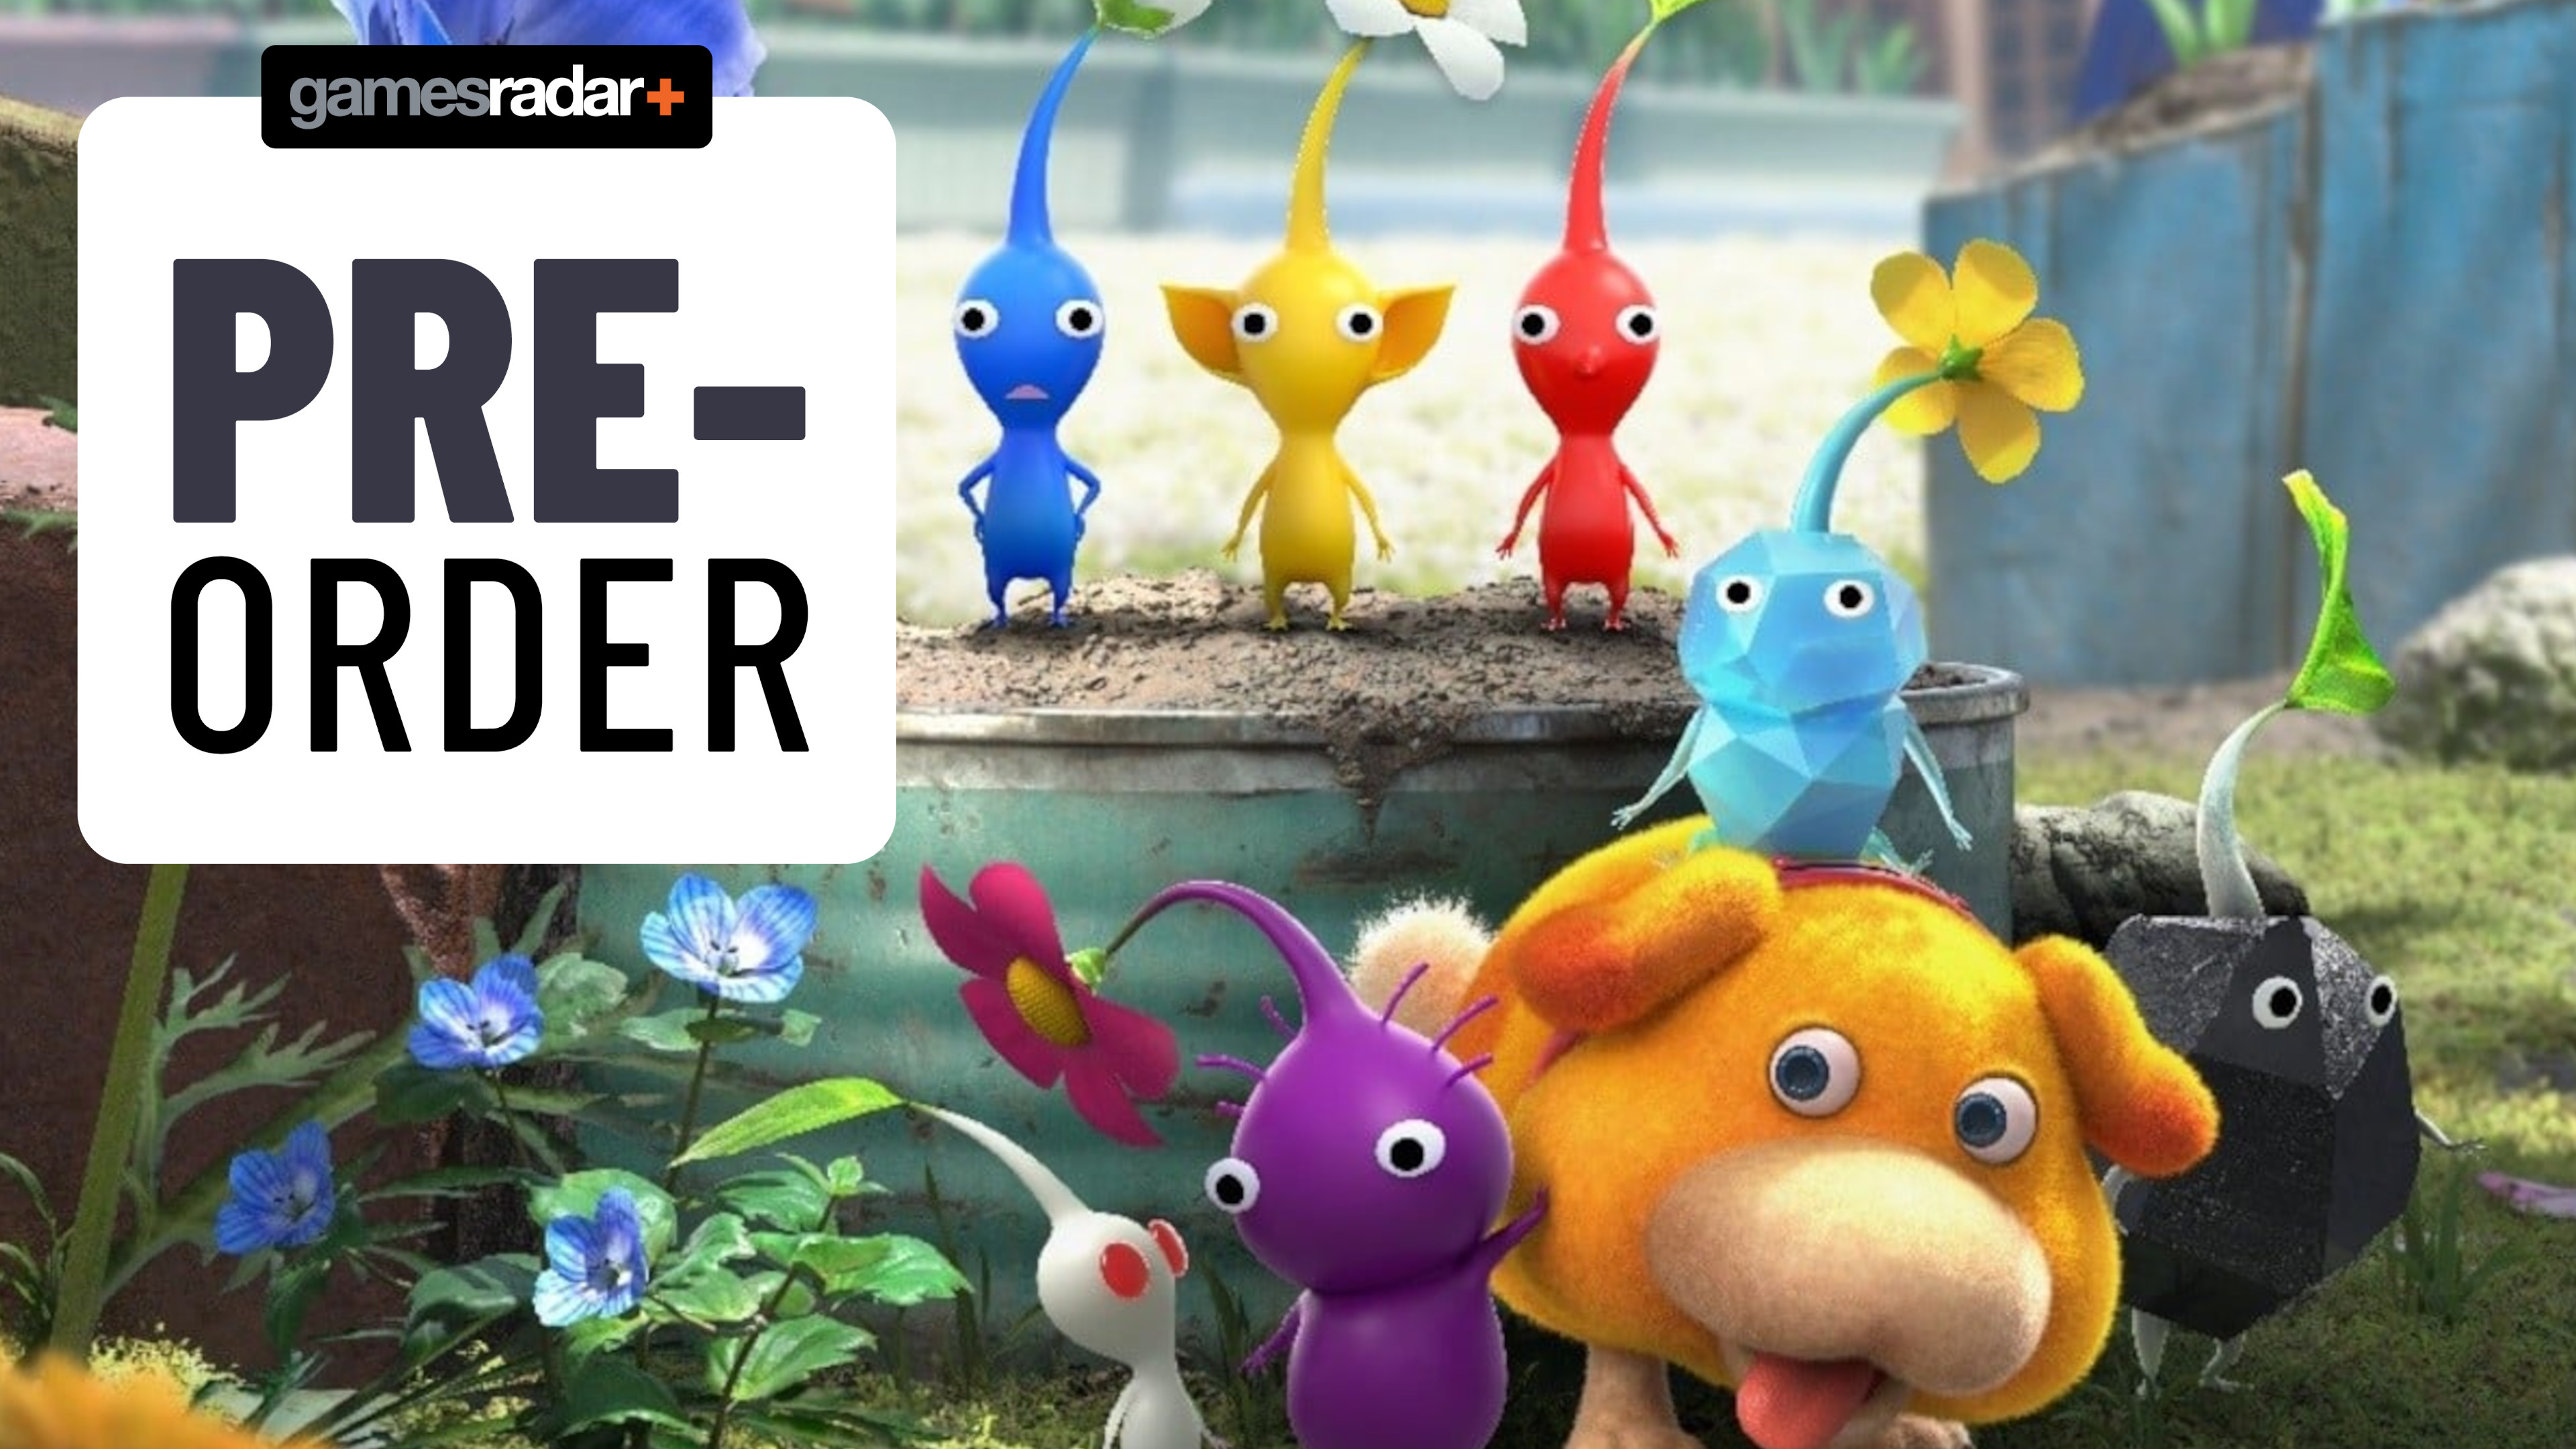 Buy Pikmin 4 Nintendo Switch Compare Prices